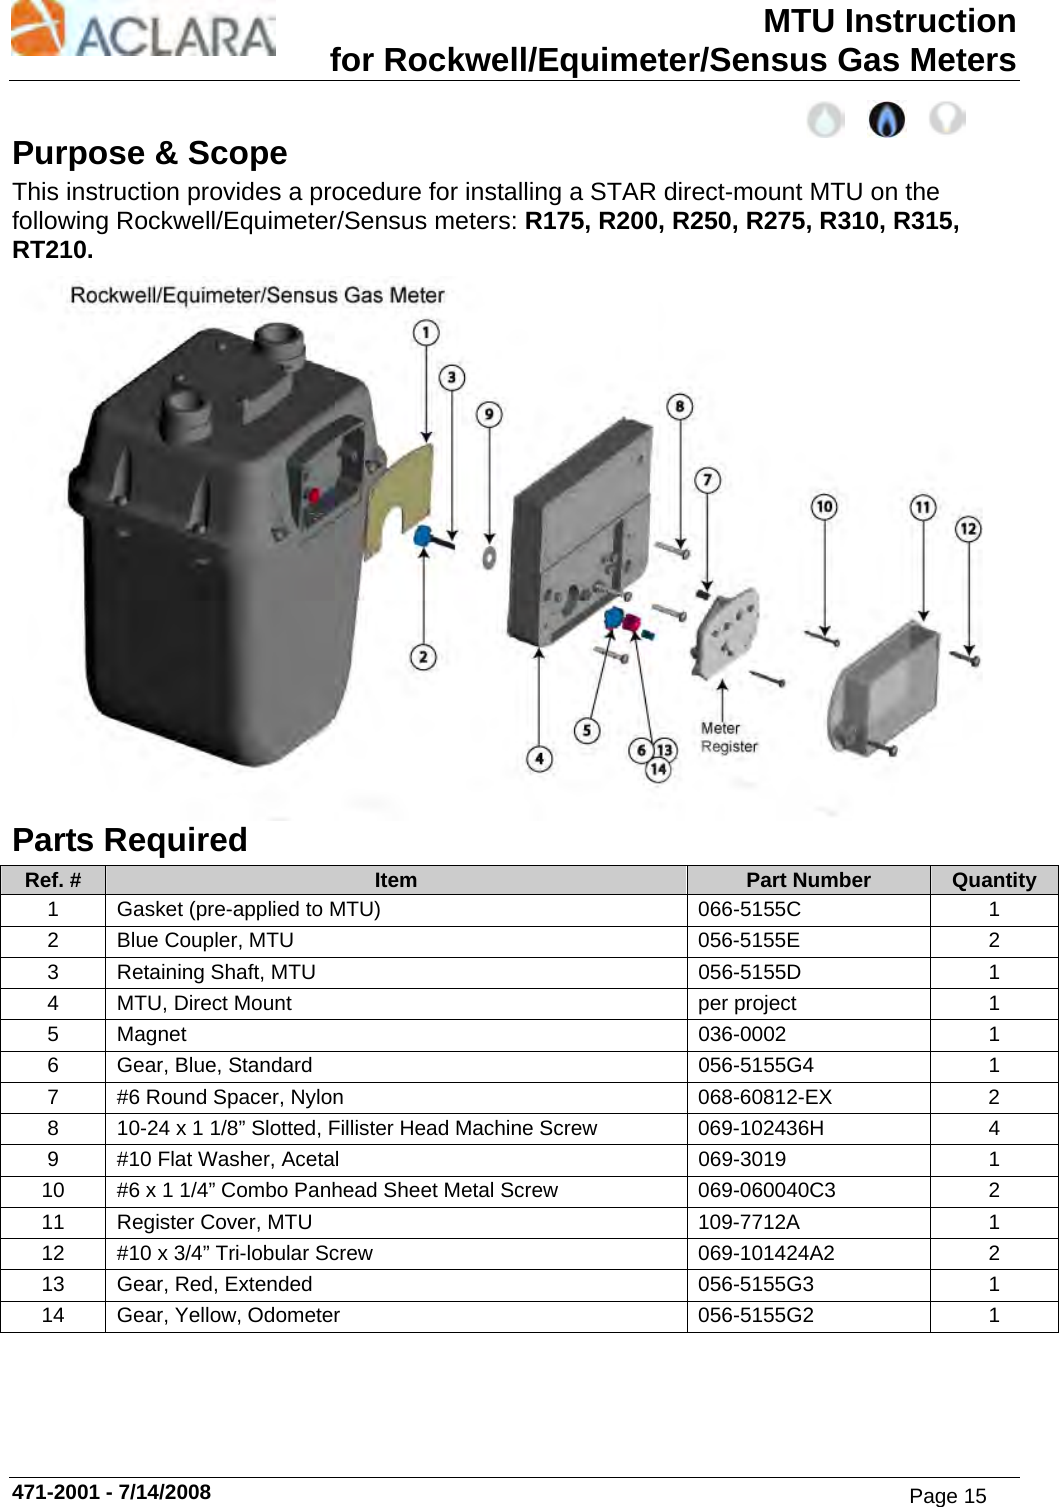 MTU Instruction for Rockwell/Equimeter/Sensus Gas Meters 471-2001 - 7/14/2008 Purpose &amp; Scope This instruction provides a procedure for installing a STAR direct-mount MTU on the following Rockwell/Equimeter/Sensus meters: R175, R200, R250, R275, R310, R315, RT210.  Parts Required Ref. #  Item  Part Number  Quantity 1  Gasket (pre-applied to MTU)  066-5155C  1 2  Blue Coupler, MTU  056-5155E  2 3  Retaining Shaft, MTU  056-5155D  1 4  MTU, Direct Mount  per project  1 5 Magnet  036-0002  1 6  Gear, Blue, Standard  056-5155G4  1 7  #6 Round Spacer, Nylon  068-60812-EX  2 8  10-24 x 1 1/8” Slotted, Fillister Head Machine Screw  069-102436H  4 9  #10 Flat Washer, Acetal  069-3019  1 10  #6 x 1 1/4” Combo Panhead Sheet Metal Screw  069-060040C3  2 11 Register Cover, MTU  109-7712A  1 12  #10 x 3/4” Tri-lobular Screw  069-101424A2  2 13 Gear, Red, Extended  056-5155G3  1 14  Gear, Yellow, Odometer  056-5155G2  1 Page 15